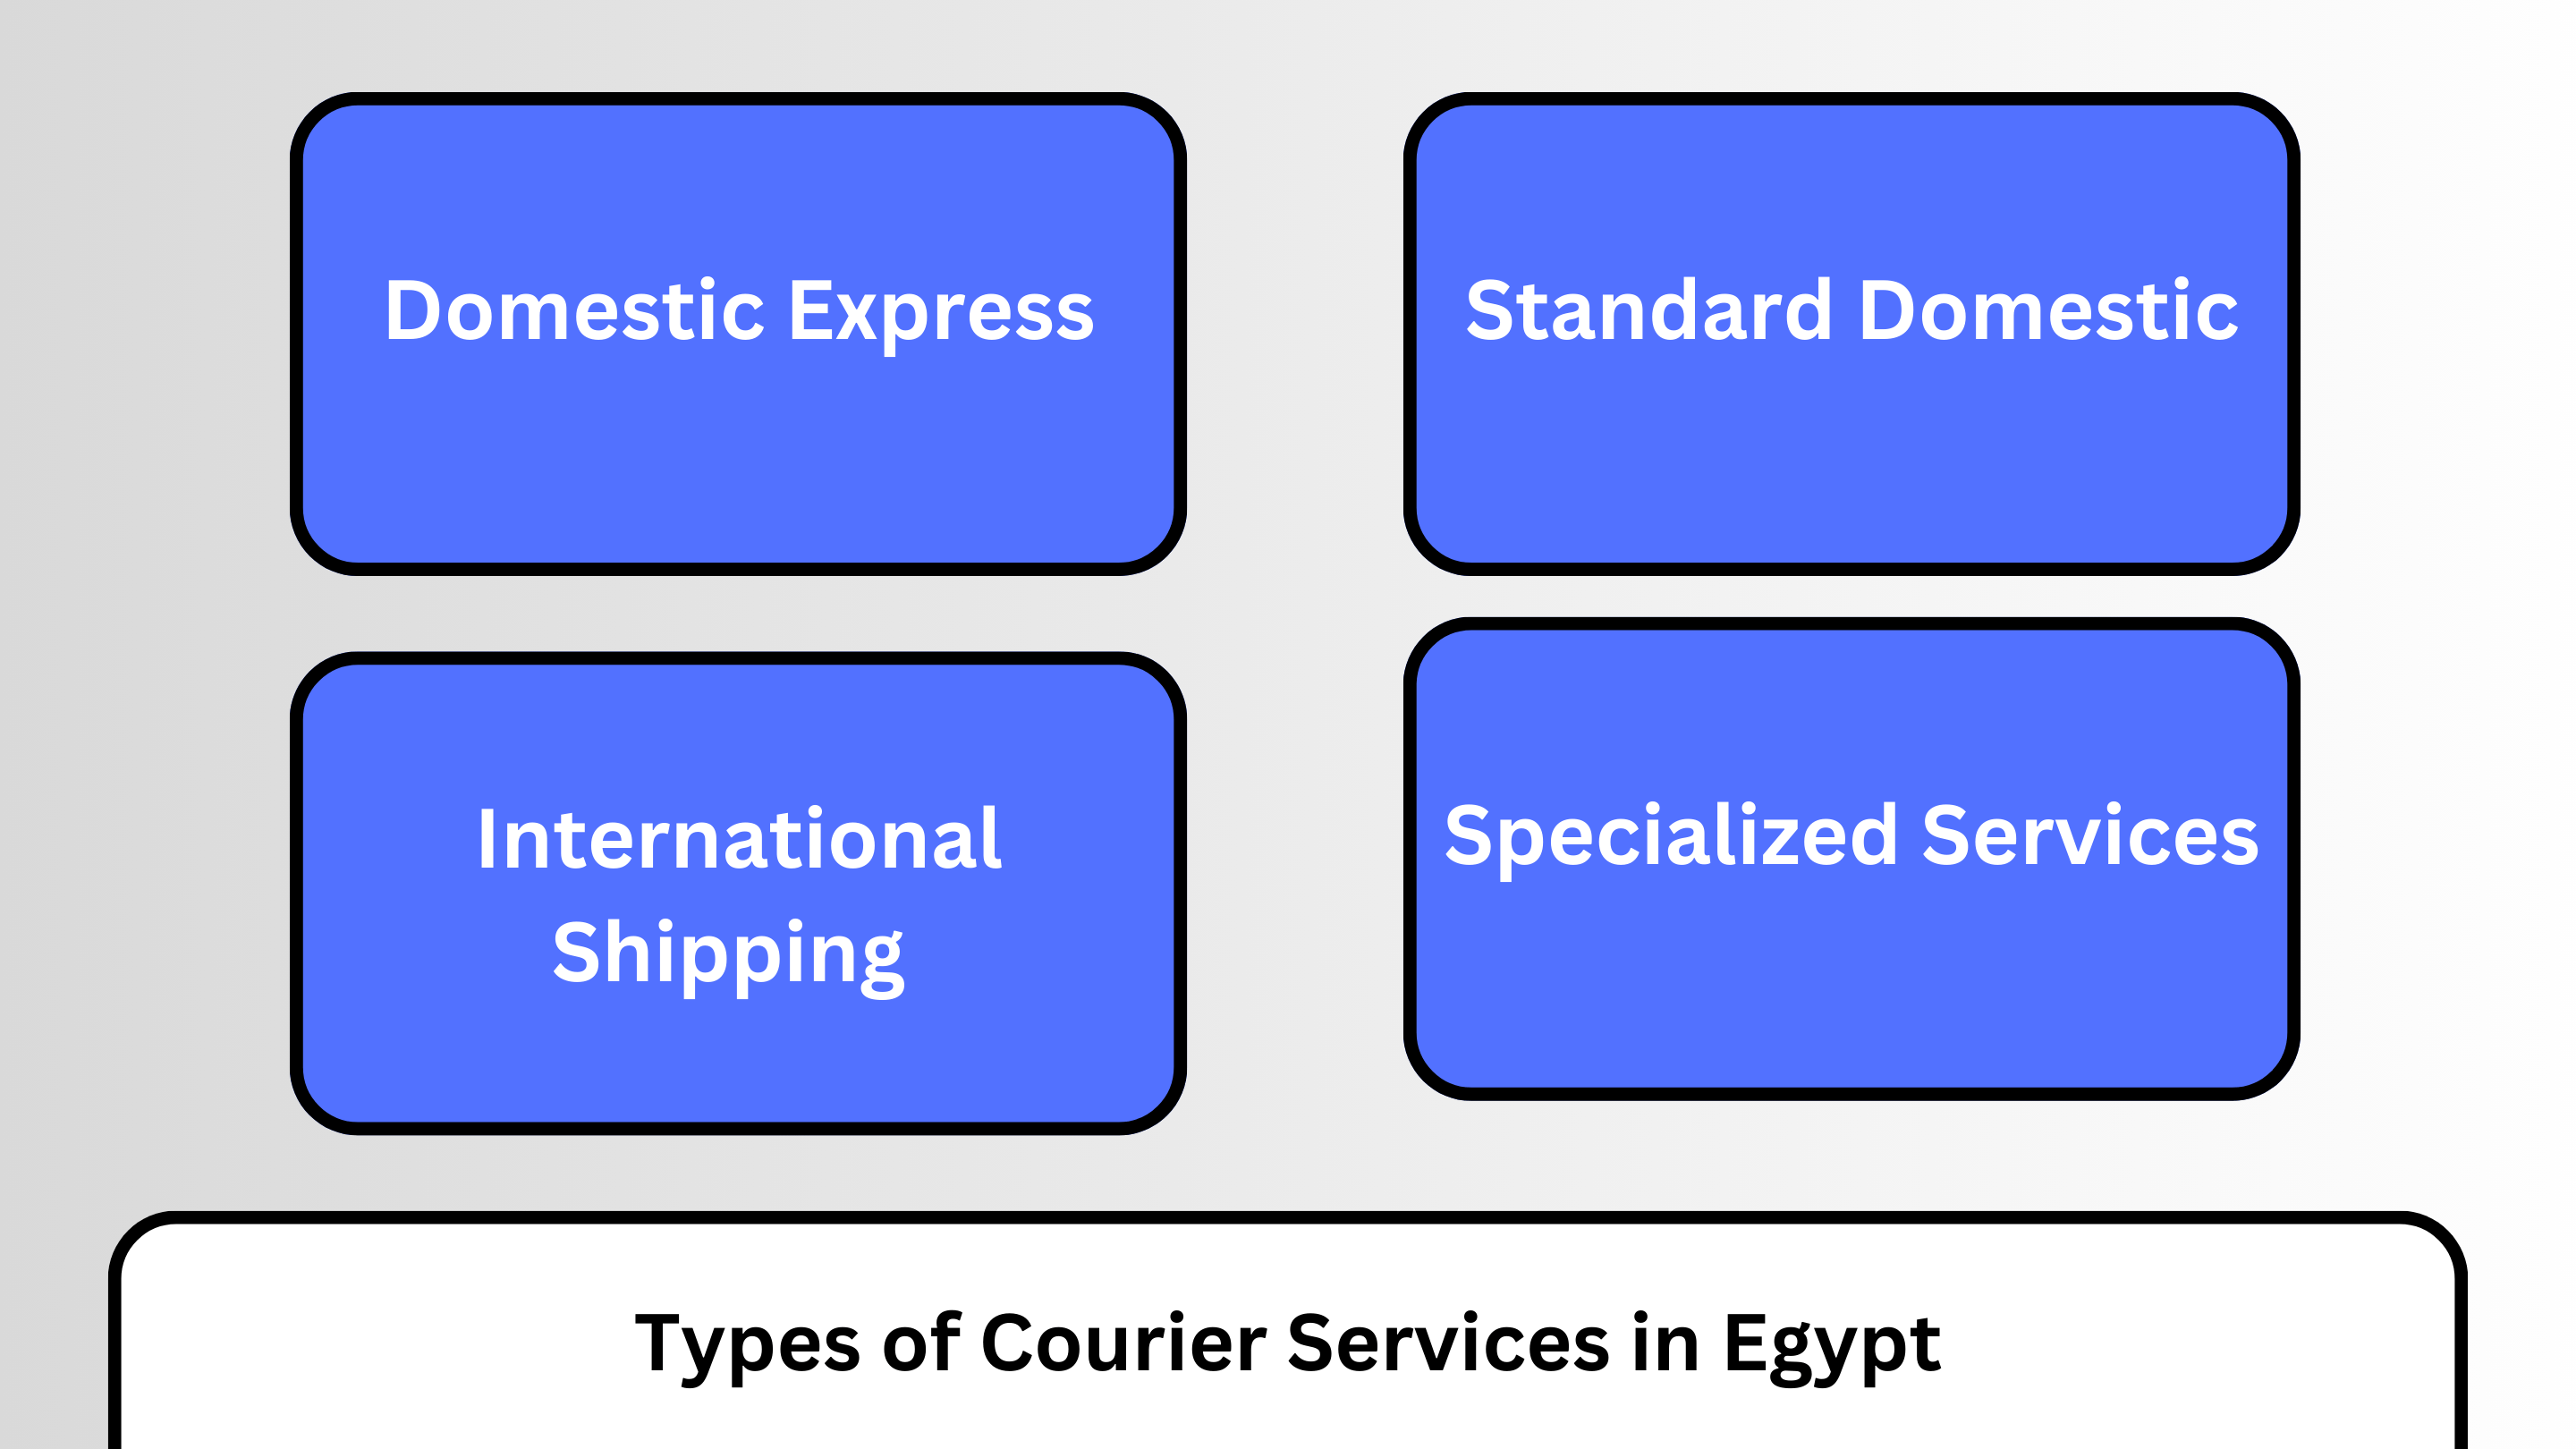 Types of Courier Services in Egypt